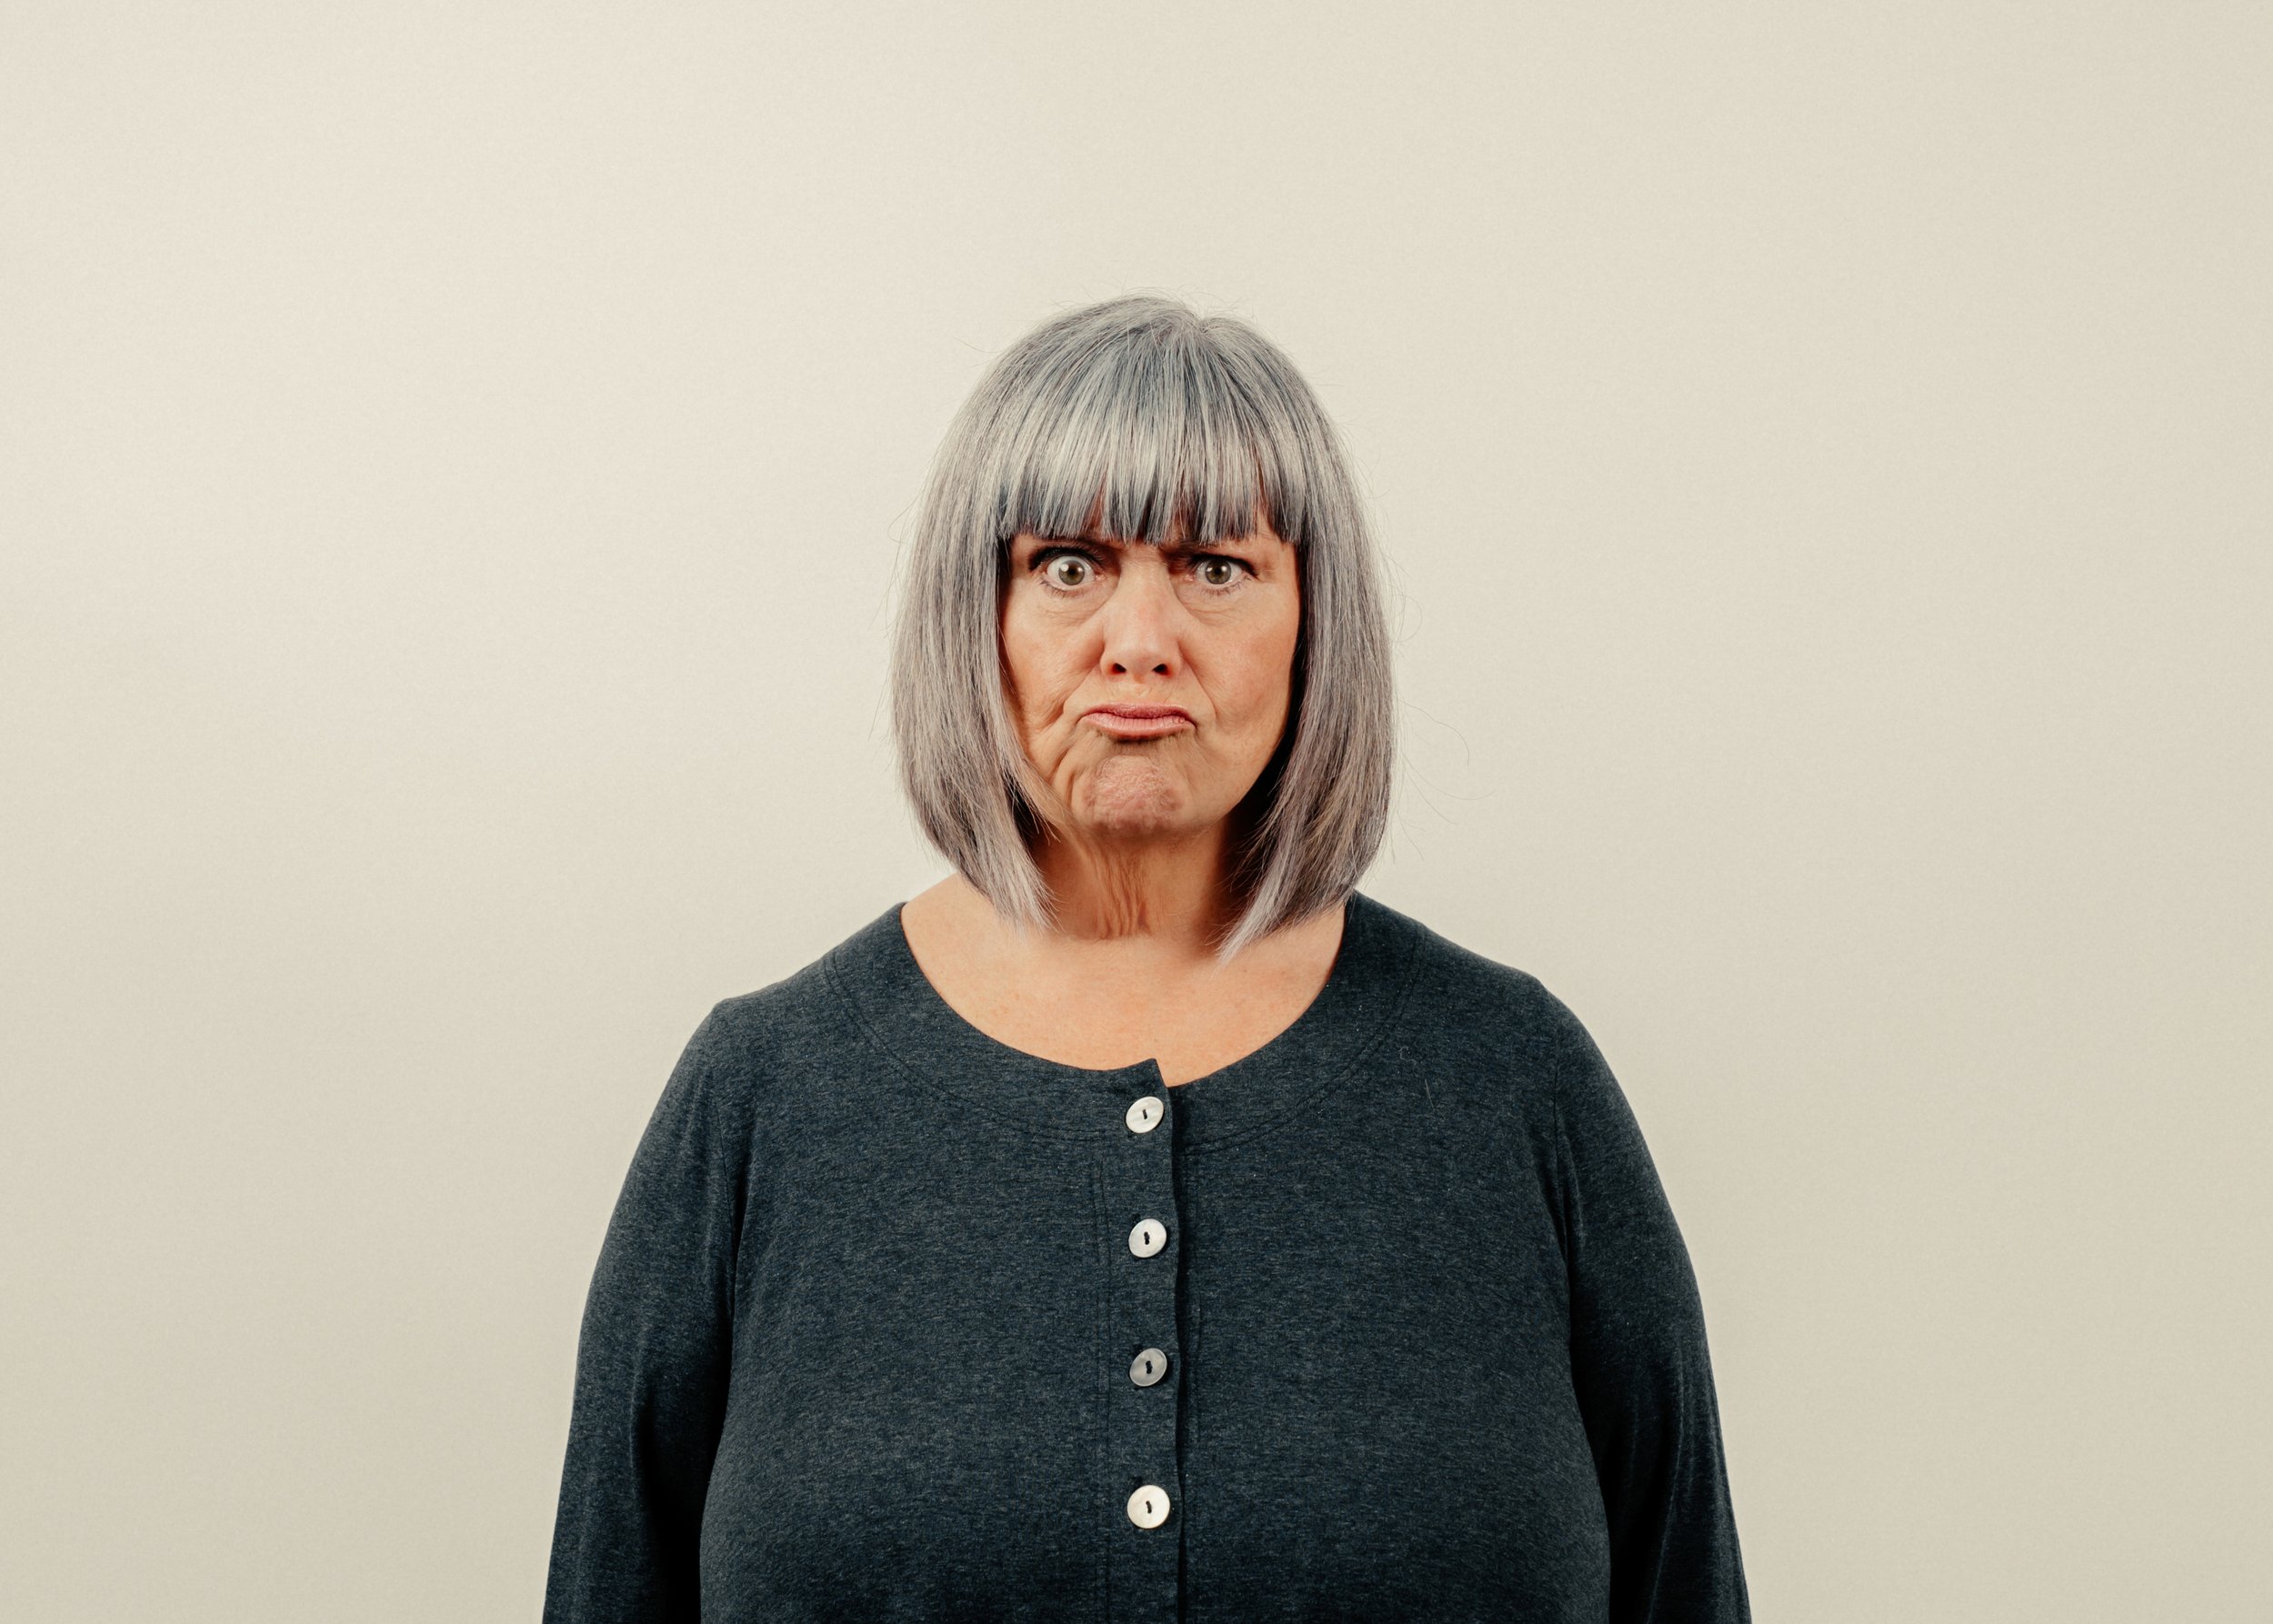  Comedian Dawn French  Audible  